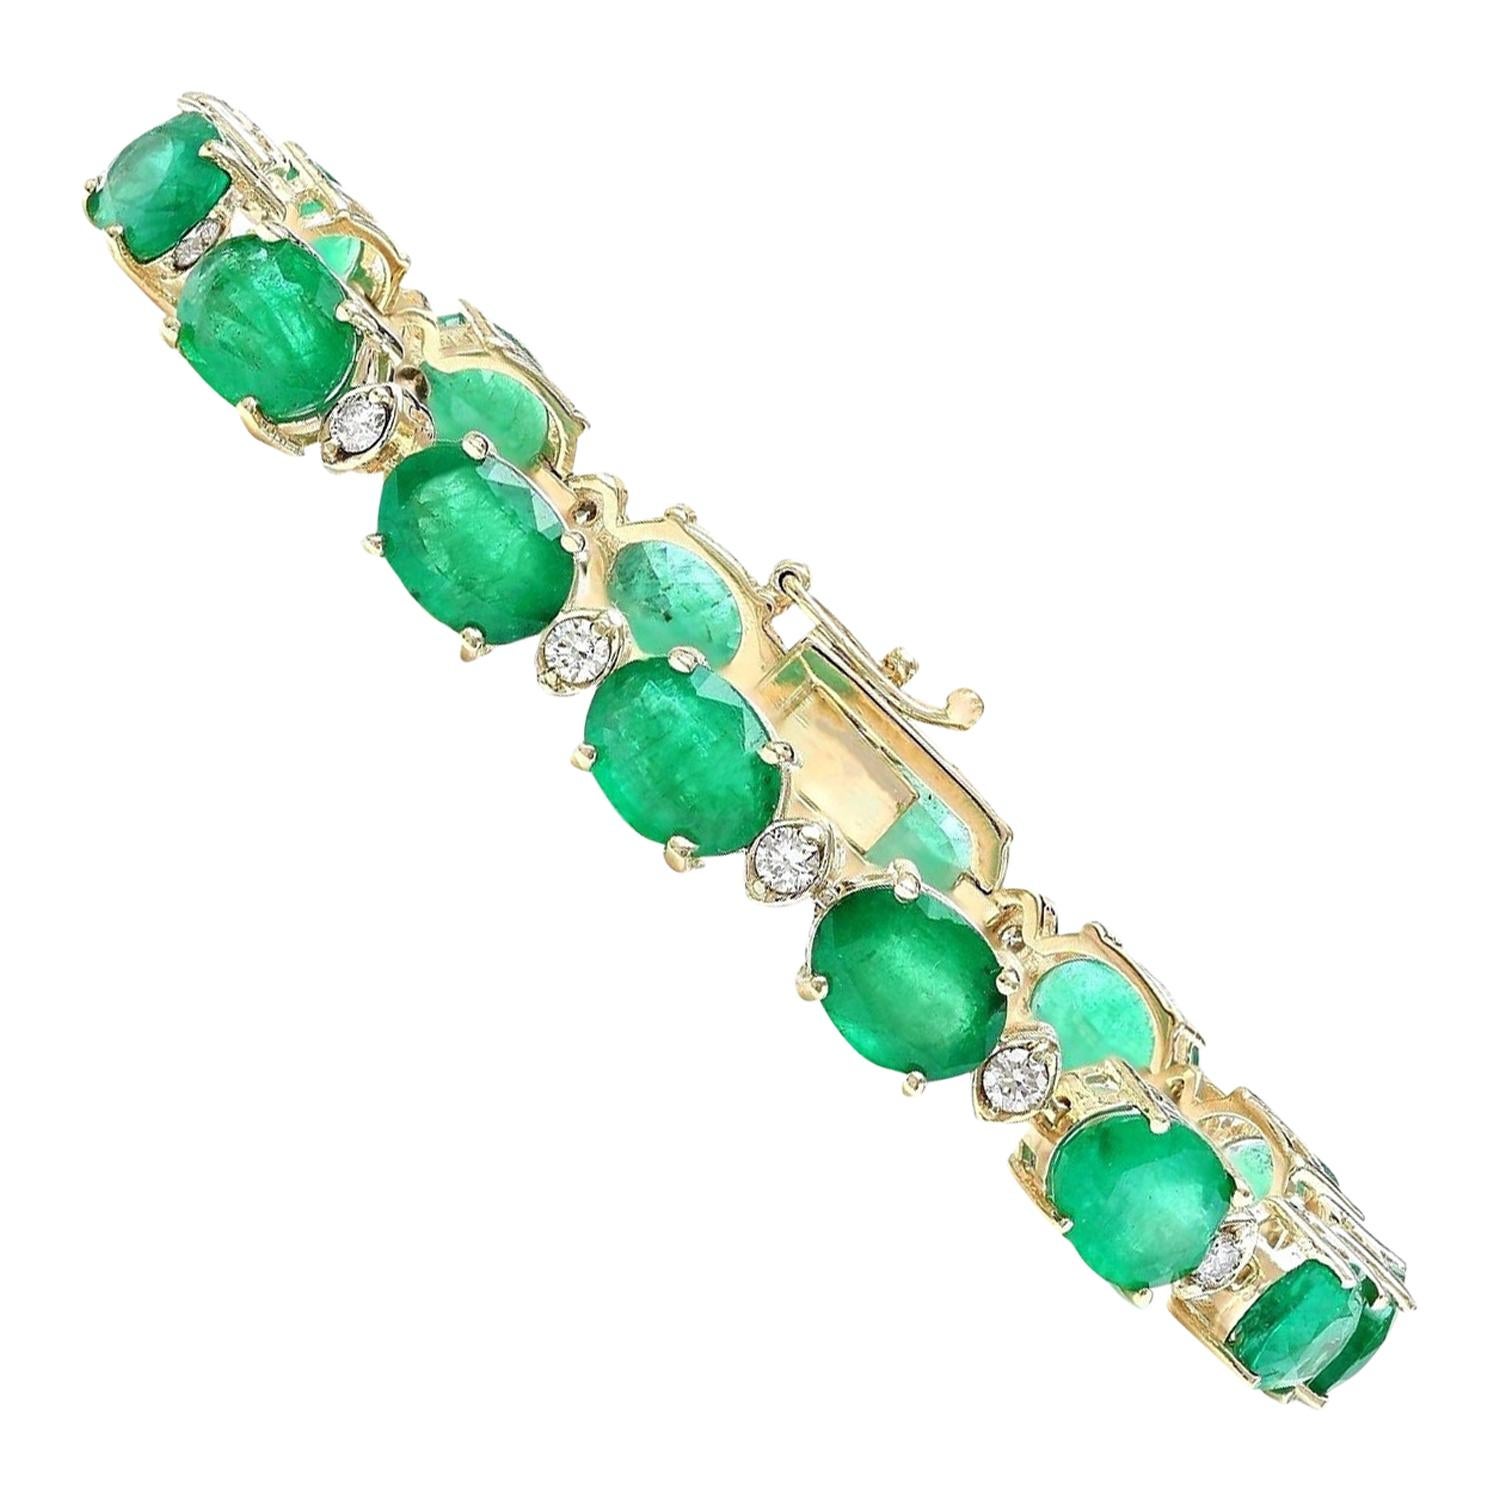 Exquisite Natural Emerald Diamond Bracelet in 14K Solid Yellow Gold